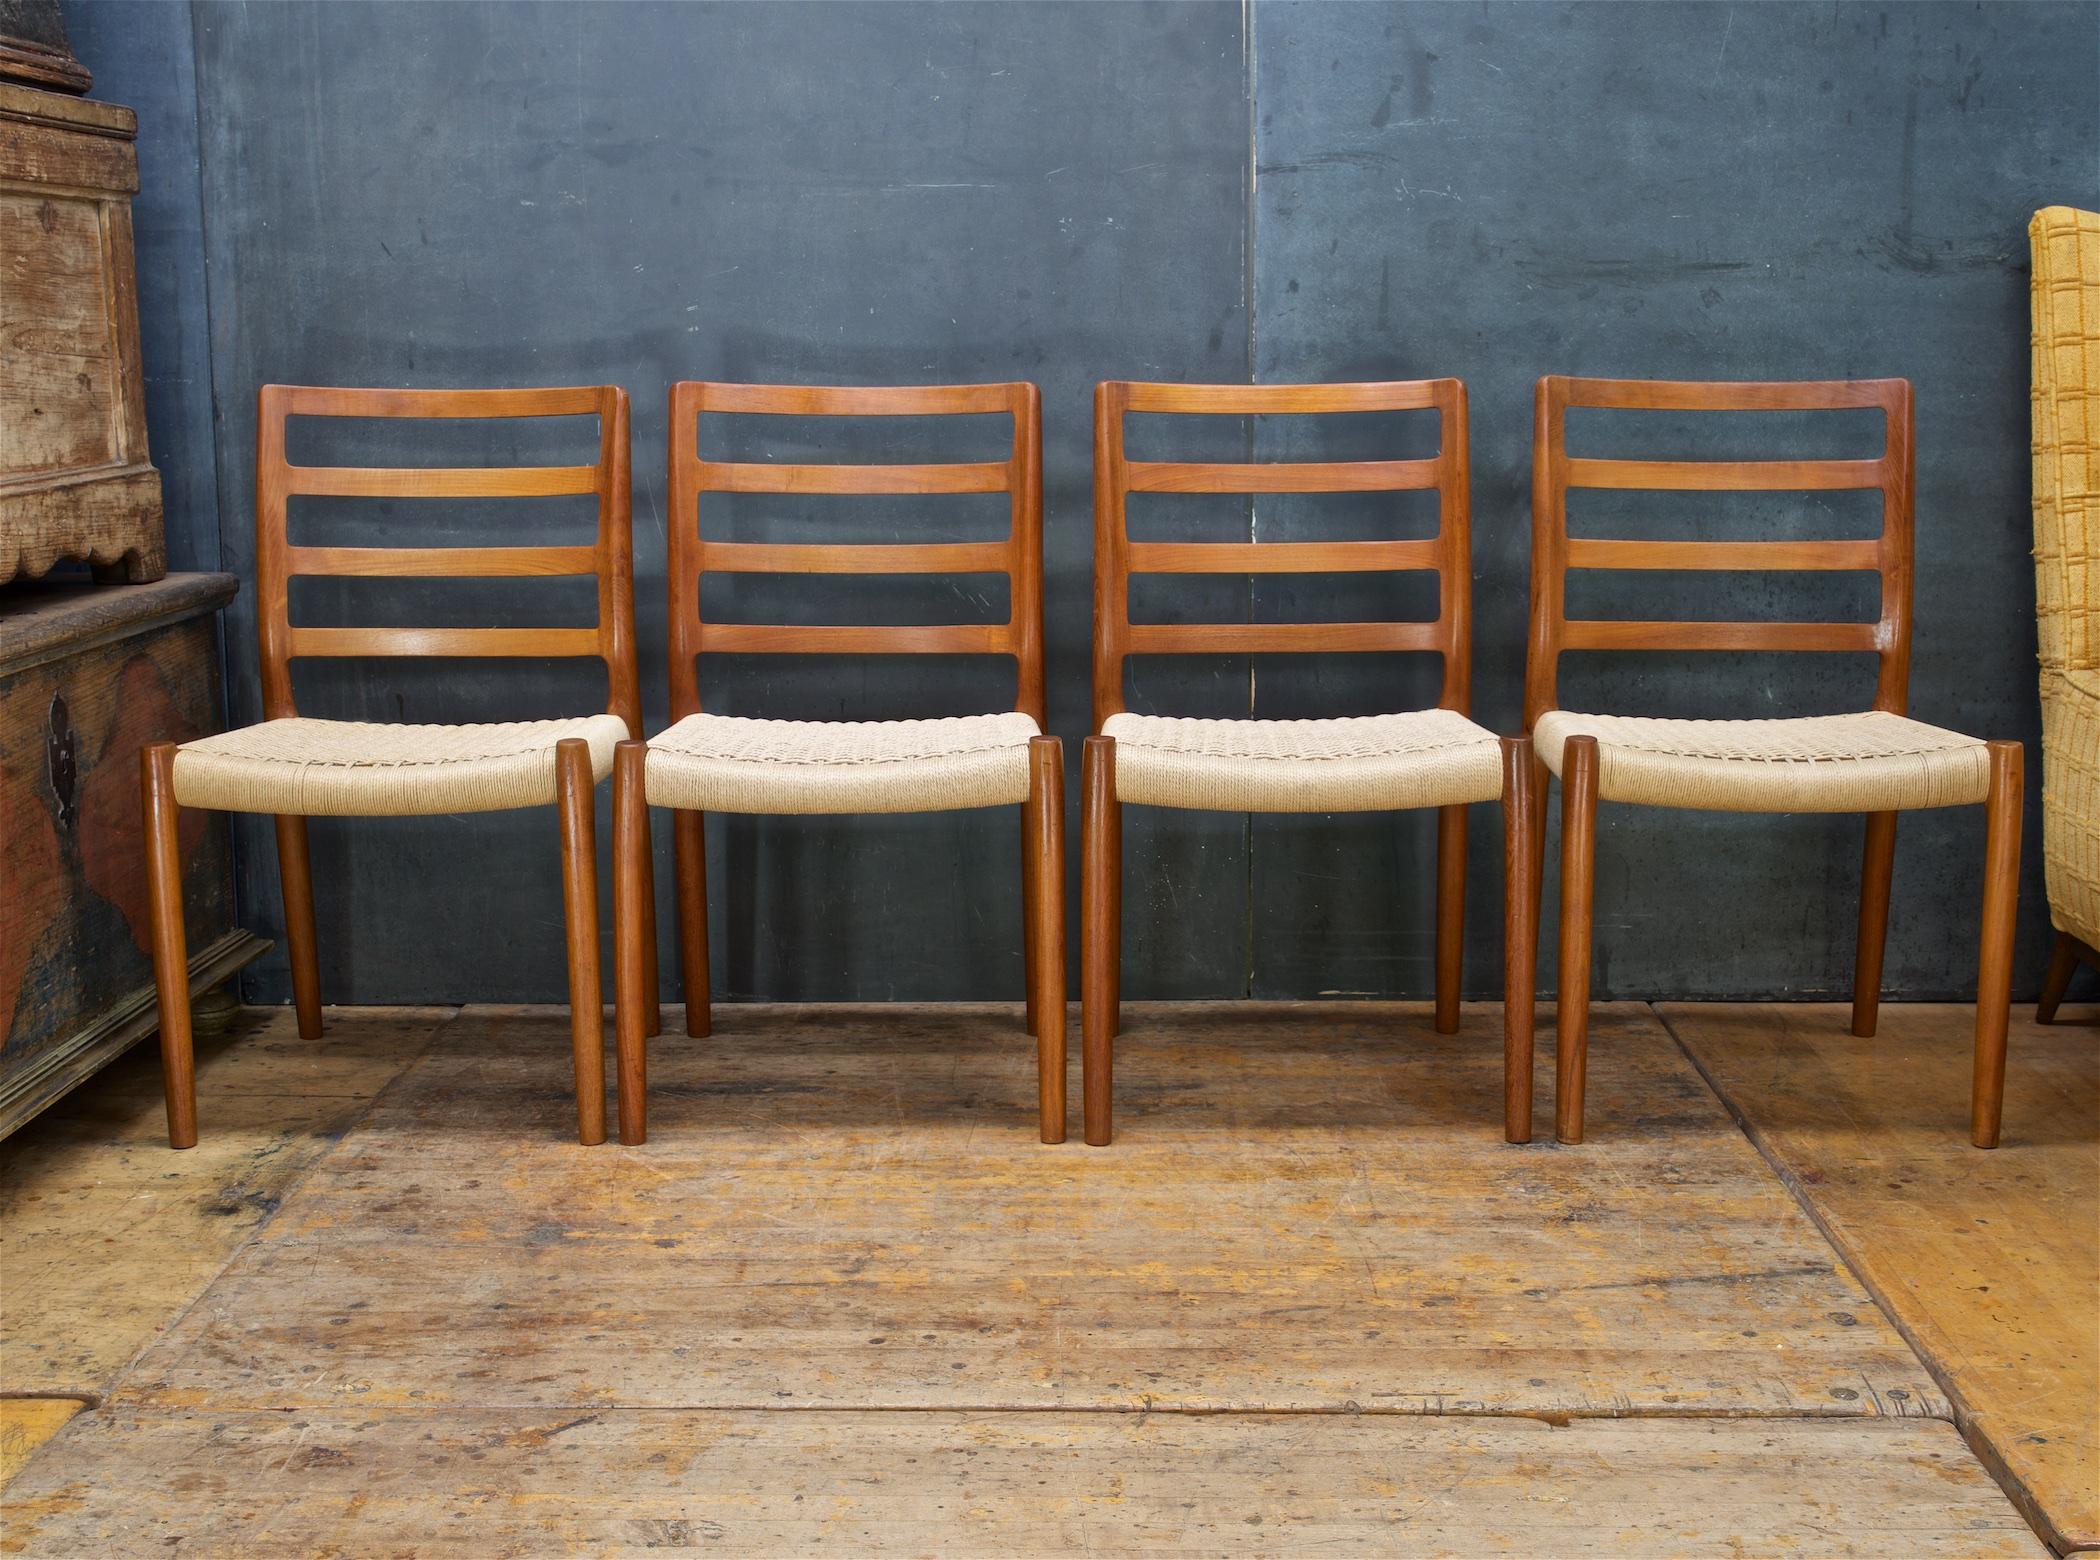 1981 Teak + Wickered Paper Cord Model Nº 85 side chairs by Niels Moller for J.L. Møllers Møbelfabrik, Denmark. A wonder and heavy solid old growth deep hued teak wood chair design. Four side chairs. All chair frames are tight and strong. Measure: